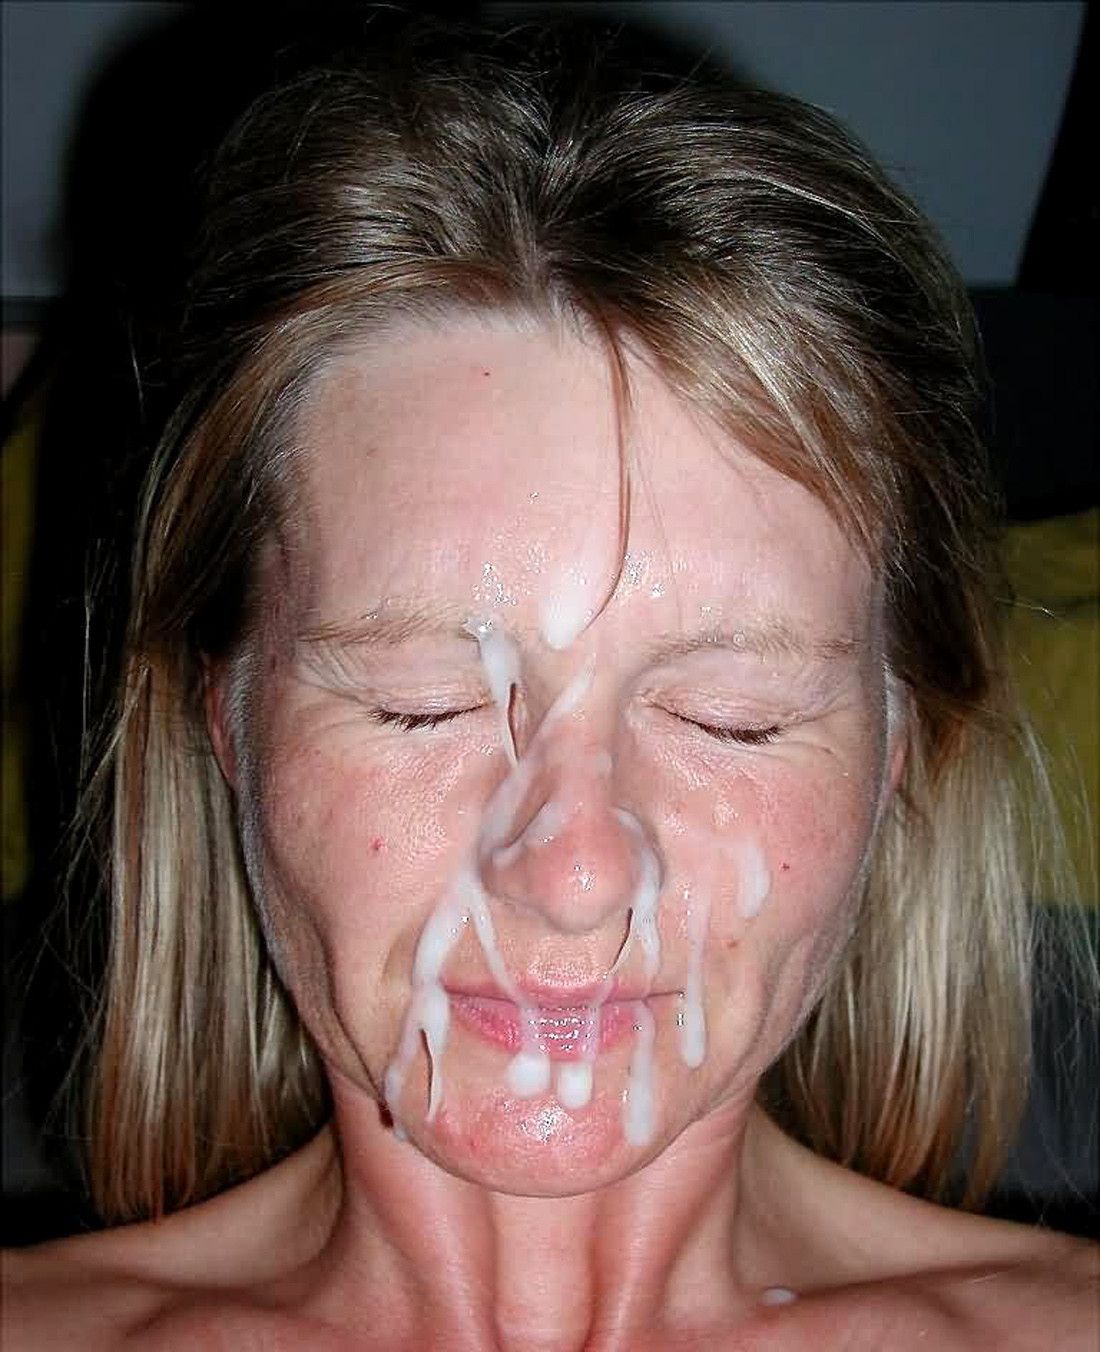 Fucking bitch loves a messy facial